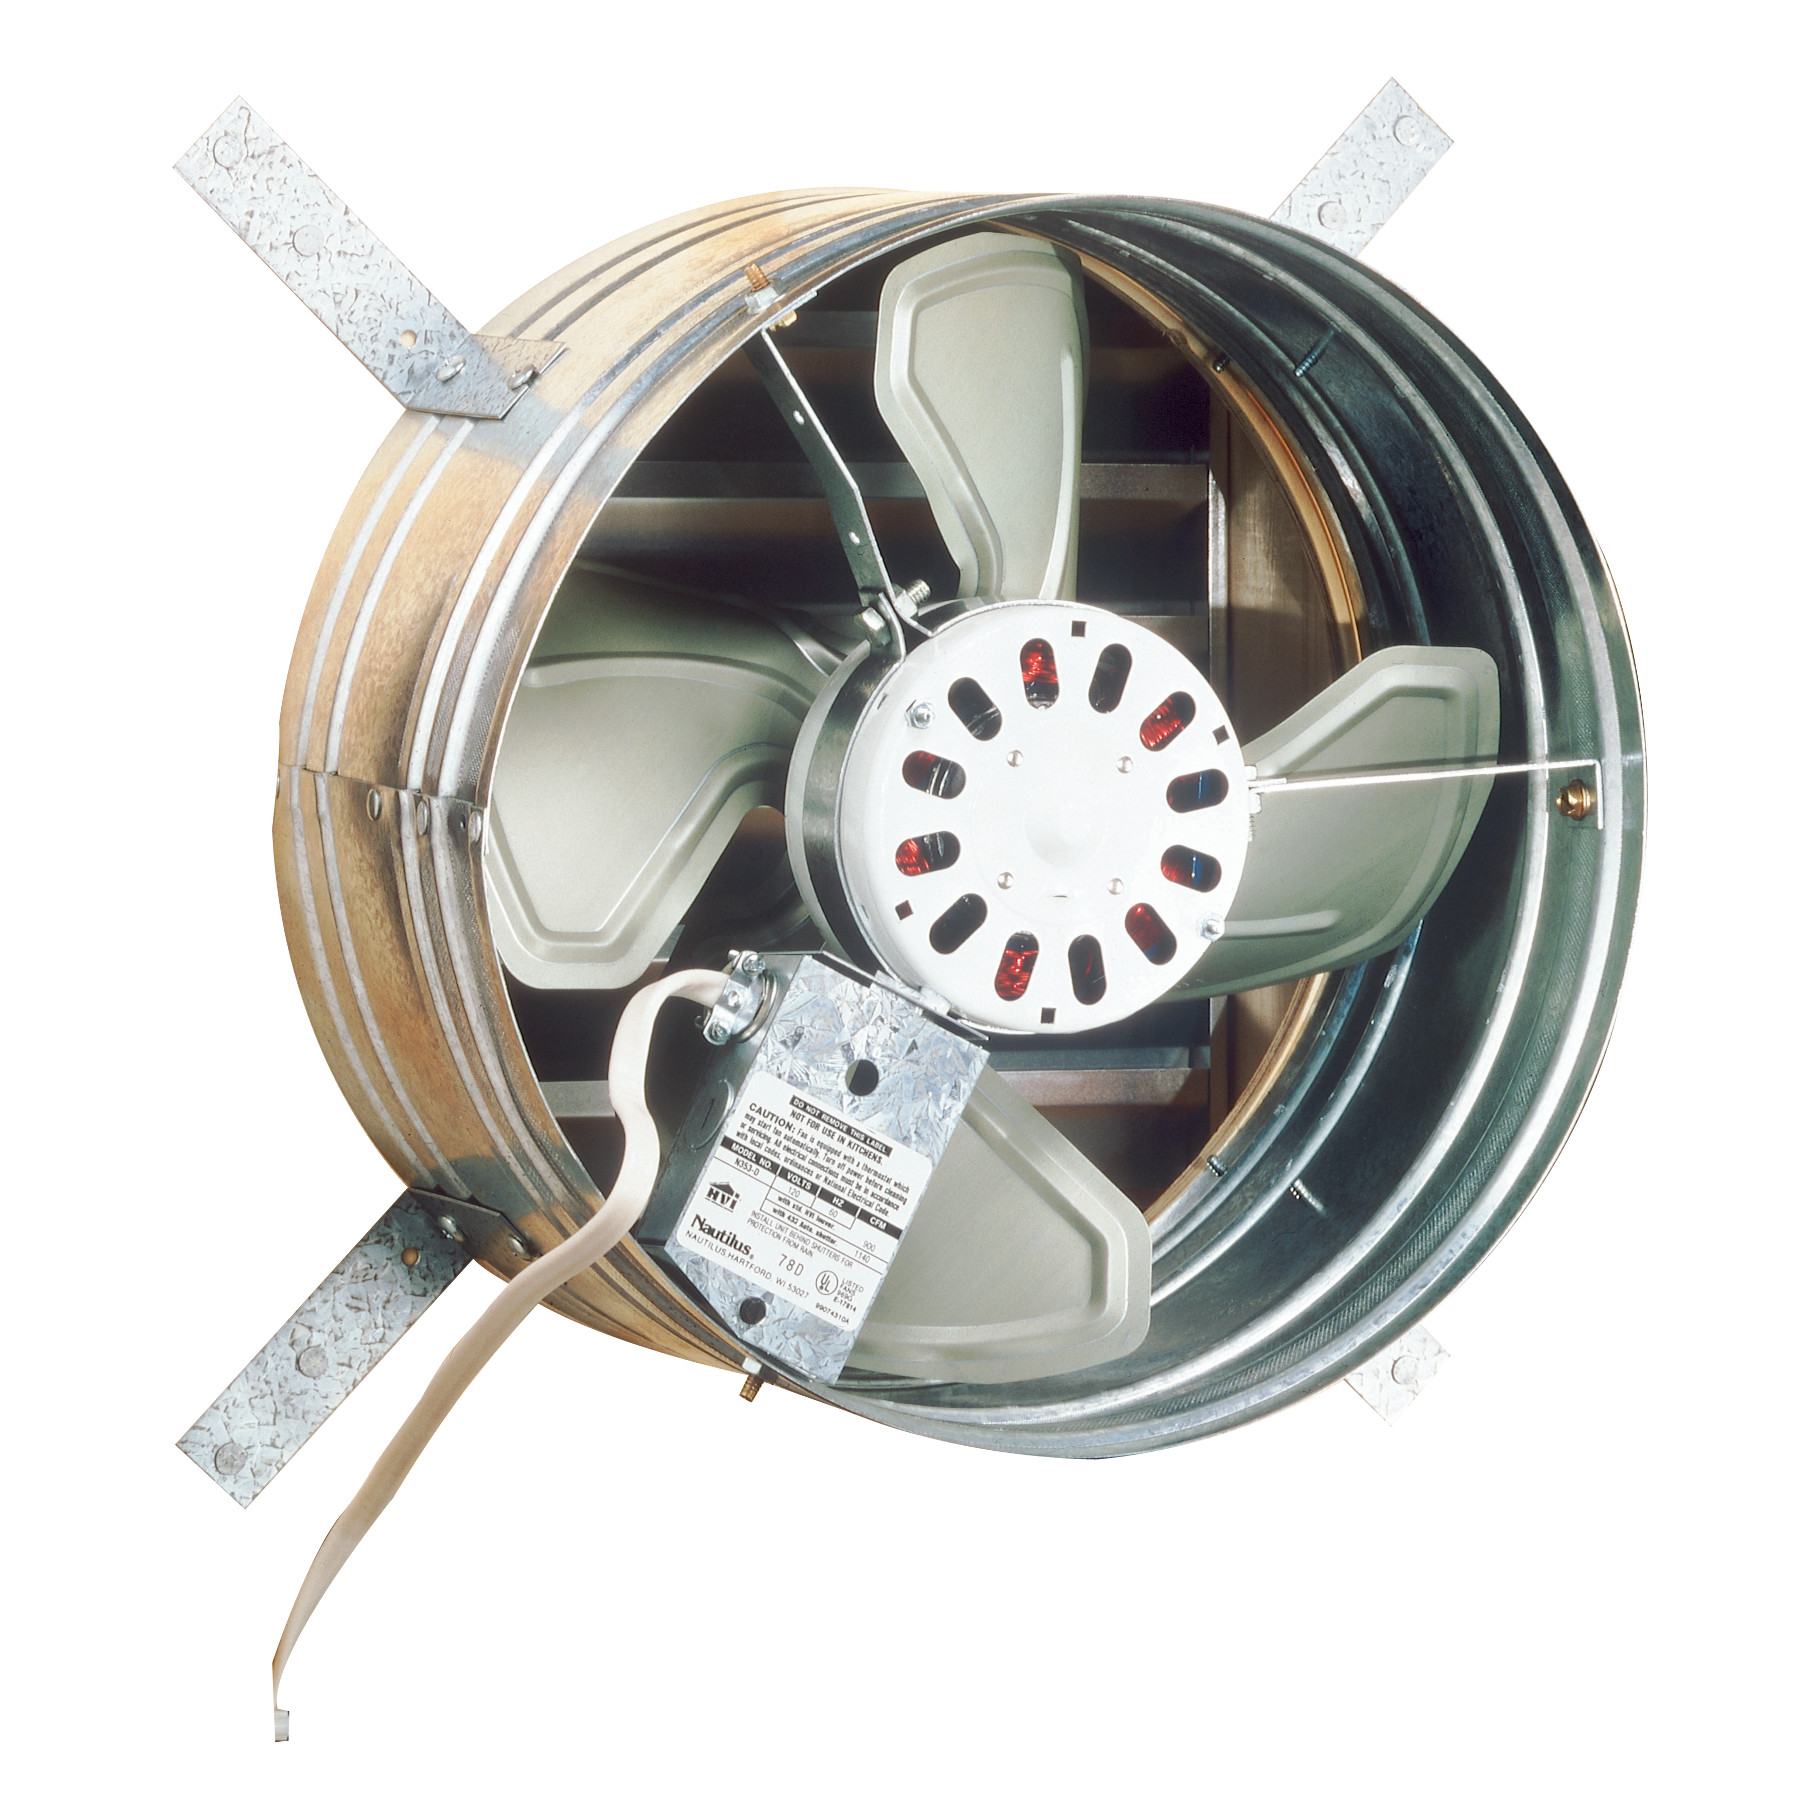 **DISCONTINUED** Broan 35316 Powered Attic and Garage Ventilation Fan, 1160 or 1600 CFM, Gable Mounted